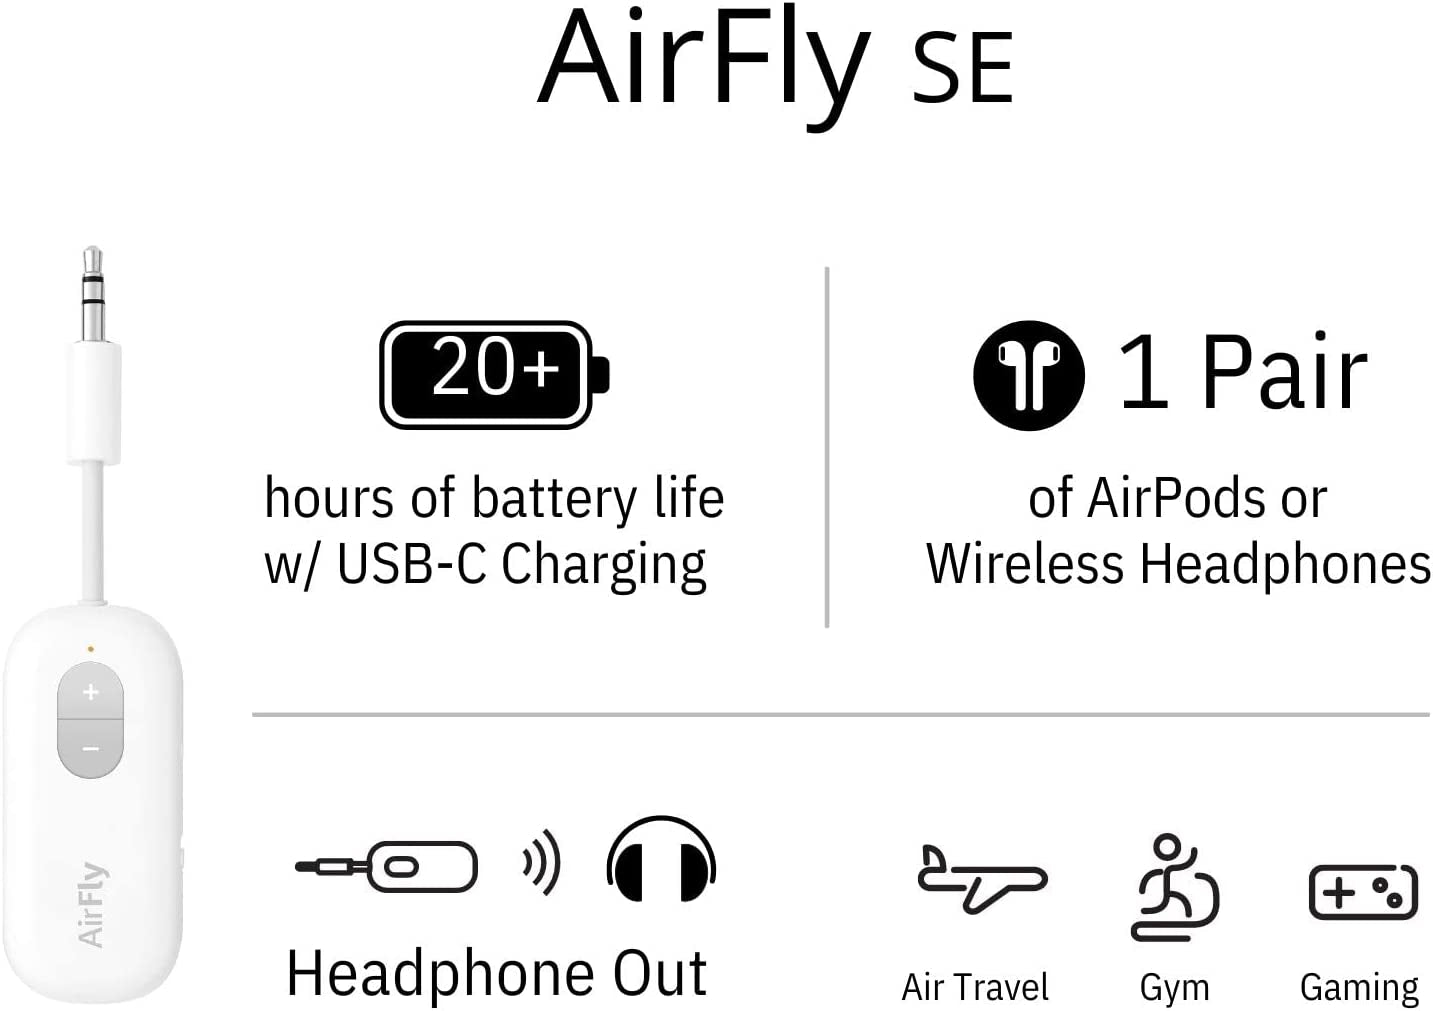 Airfly SE, Bluetooth Wireless Audio Transmitter for Airpods/Wireless or Noise-Cancelling Headphones Use with Any 3.5 Mm Audio Jack on Airplanes, Gym Equipment or Ipad/Tablets